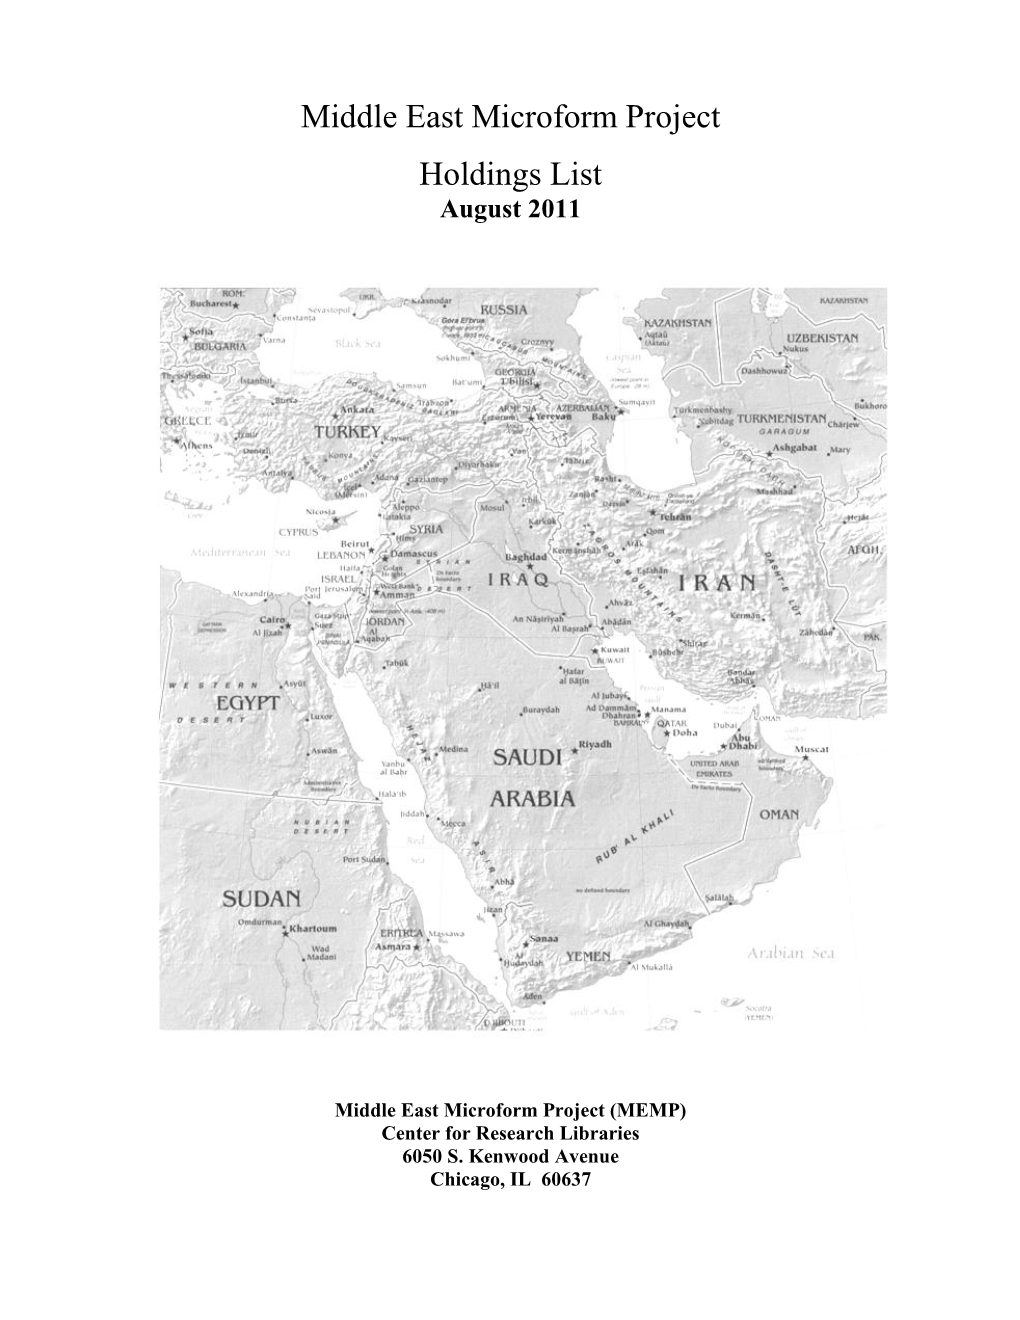 Middle East Microform Project Holdings List